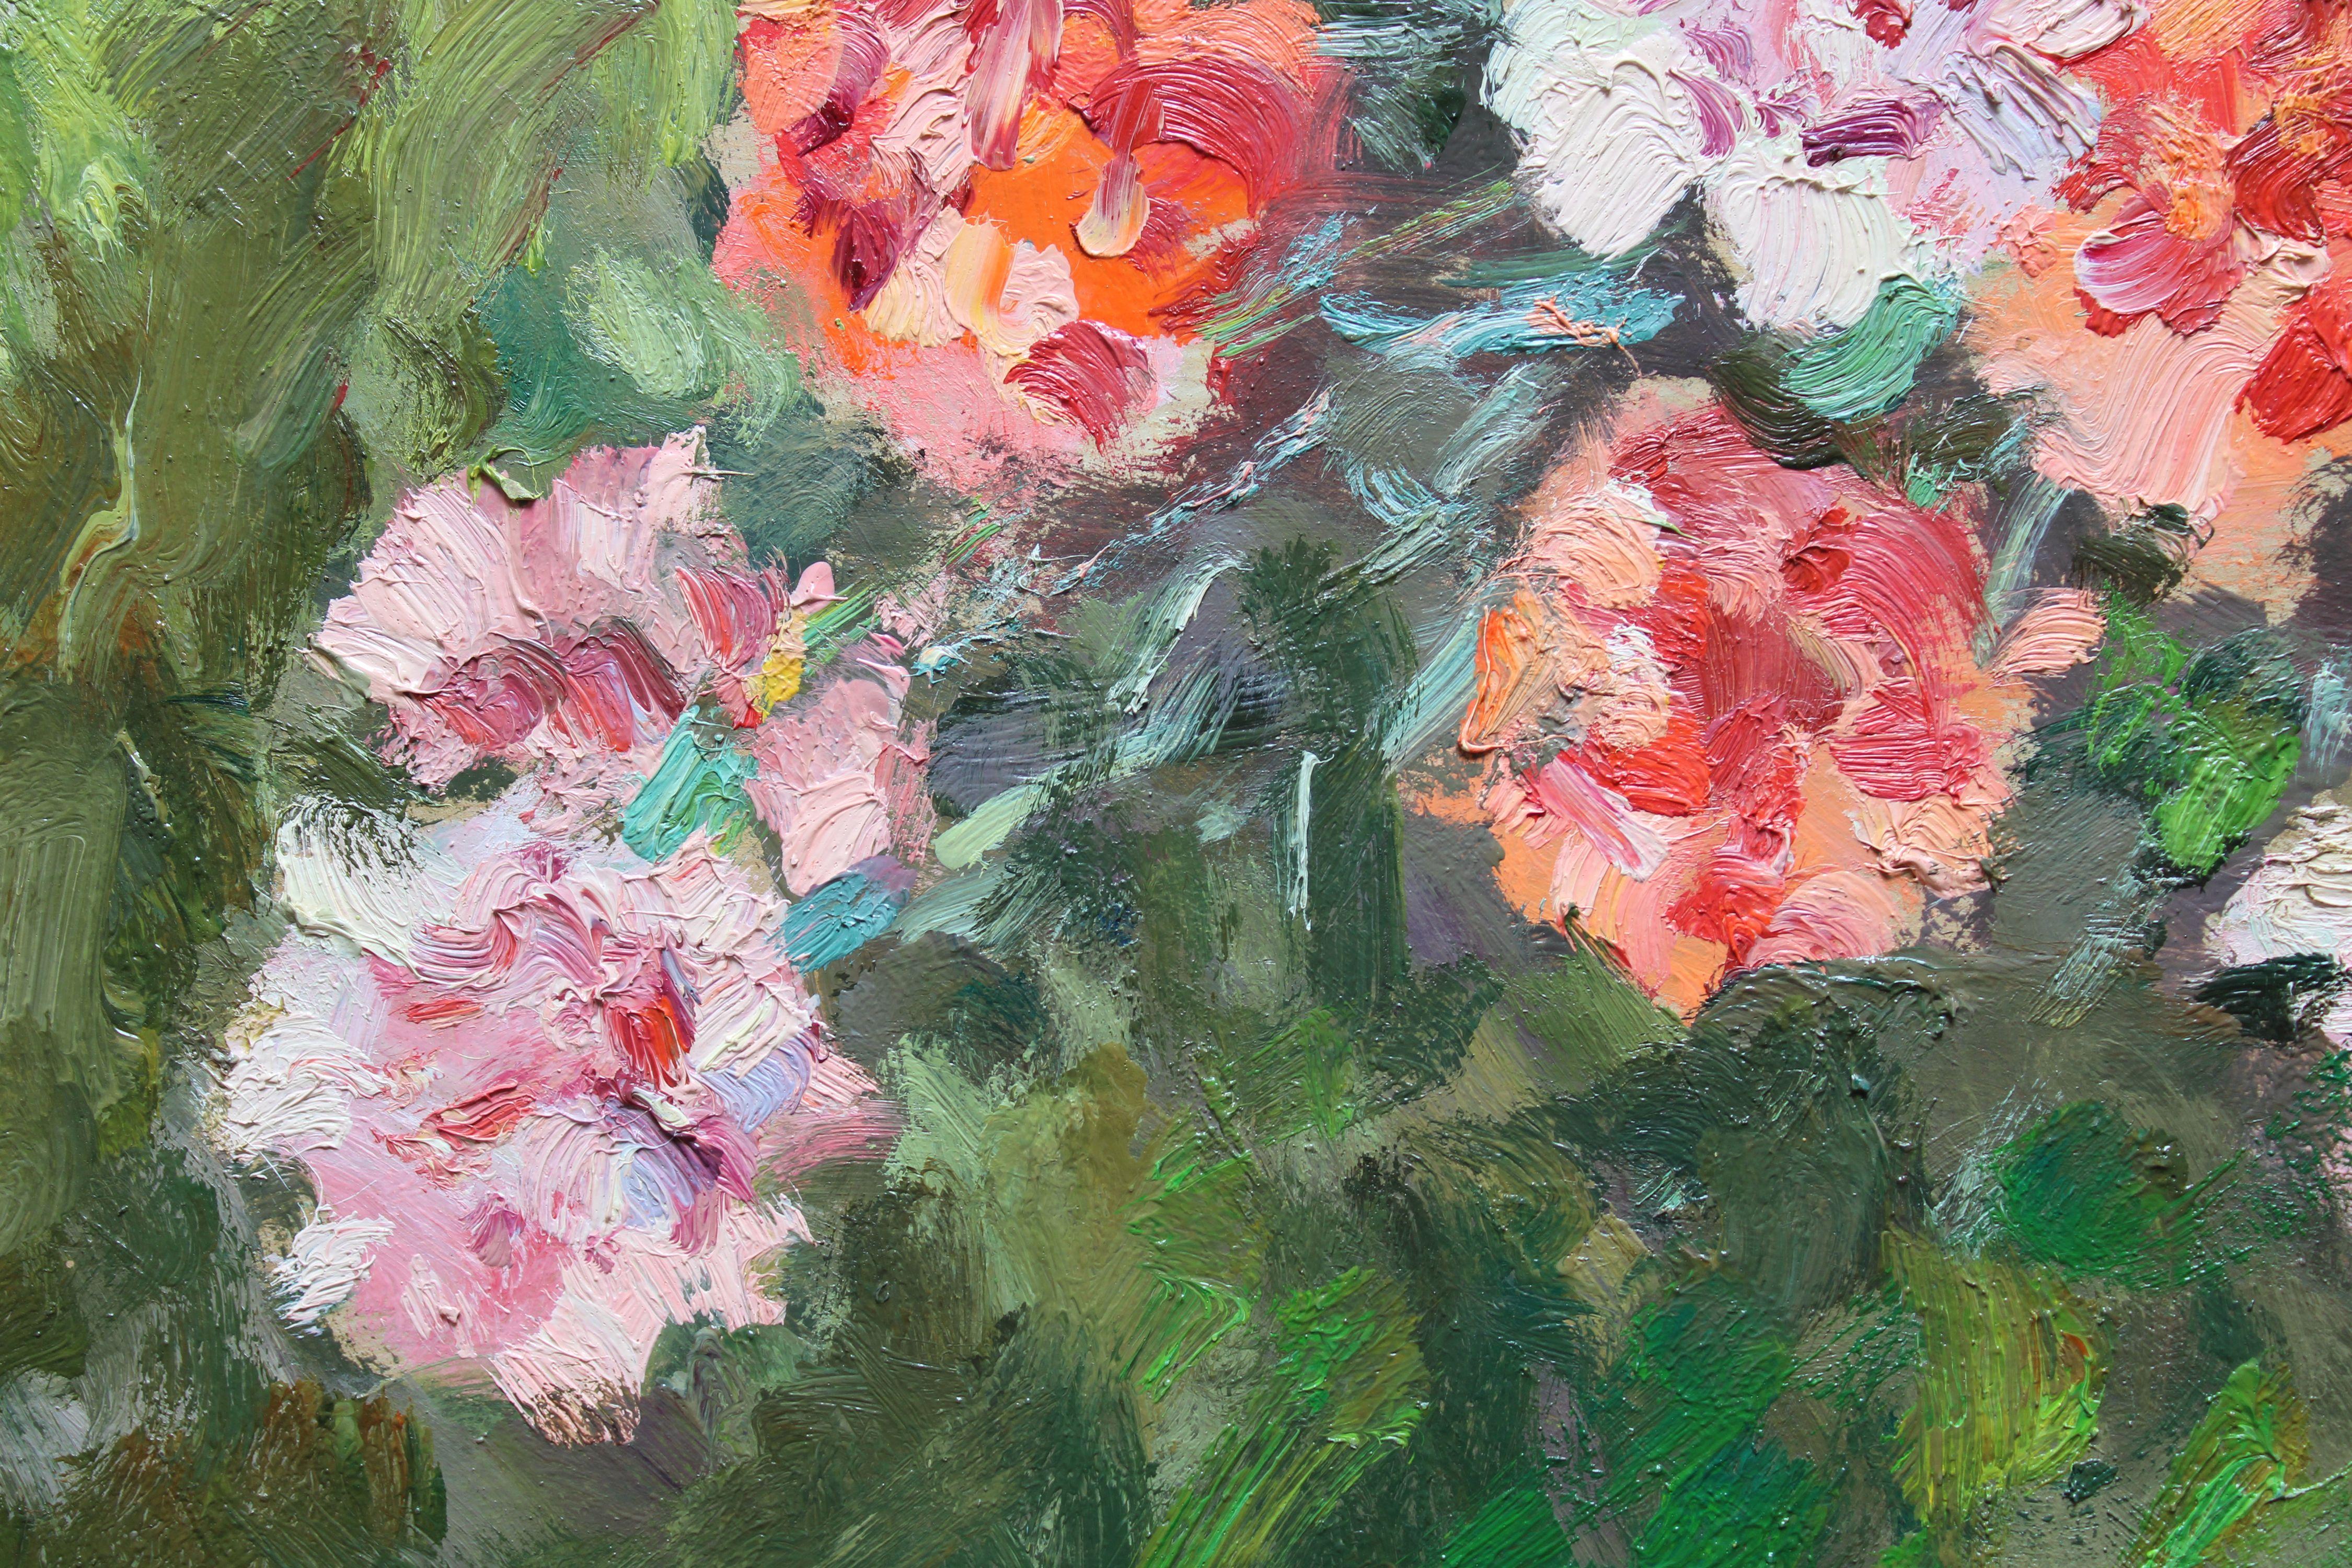 Carnations and roses. 1990, cardboard, oil, 92x67 cm - Painting by Edgars Vinters